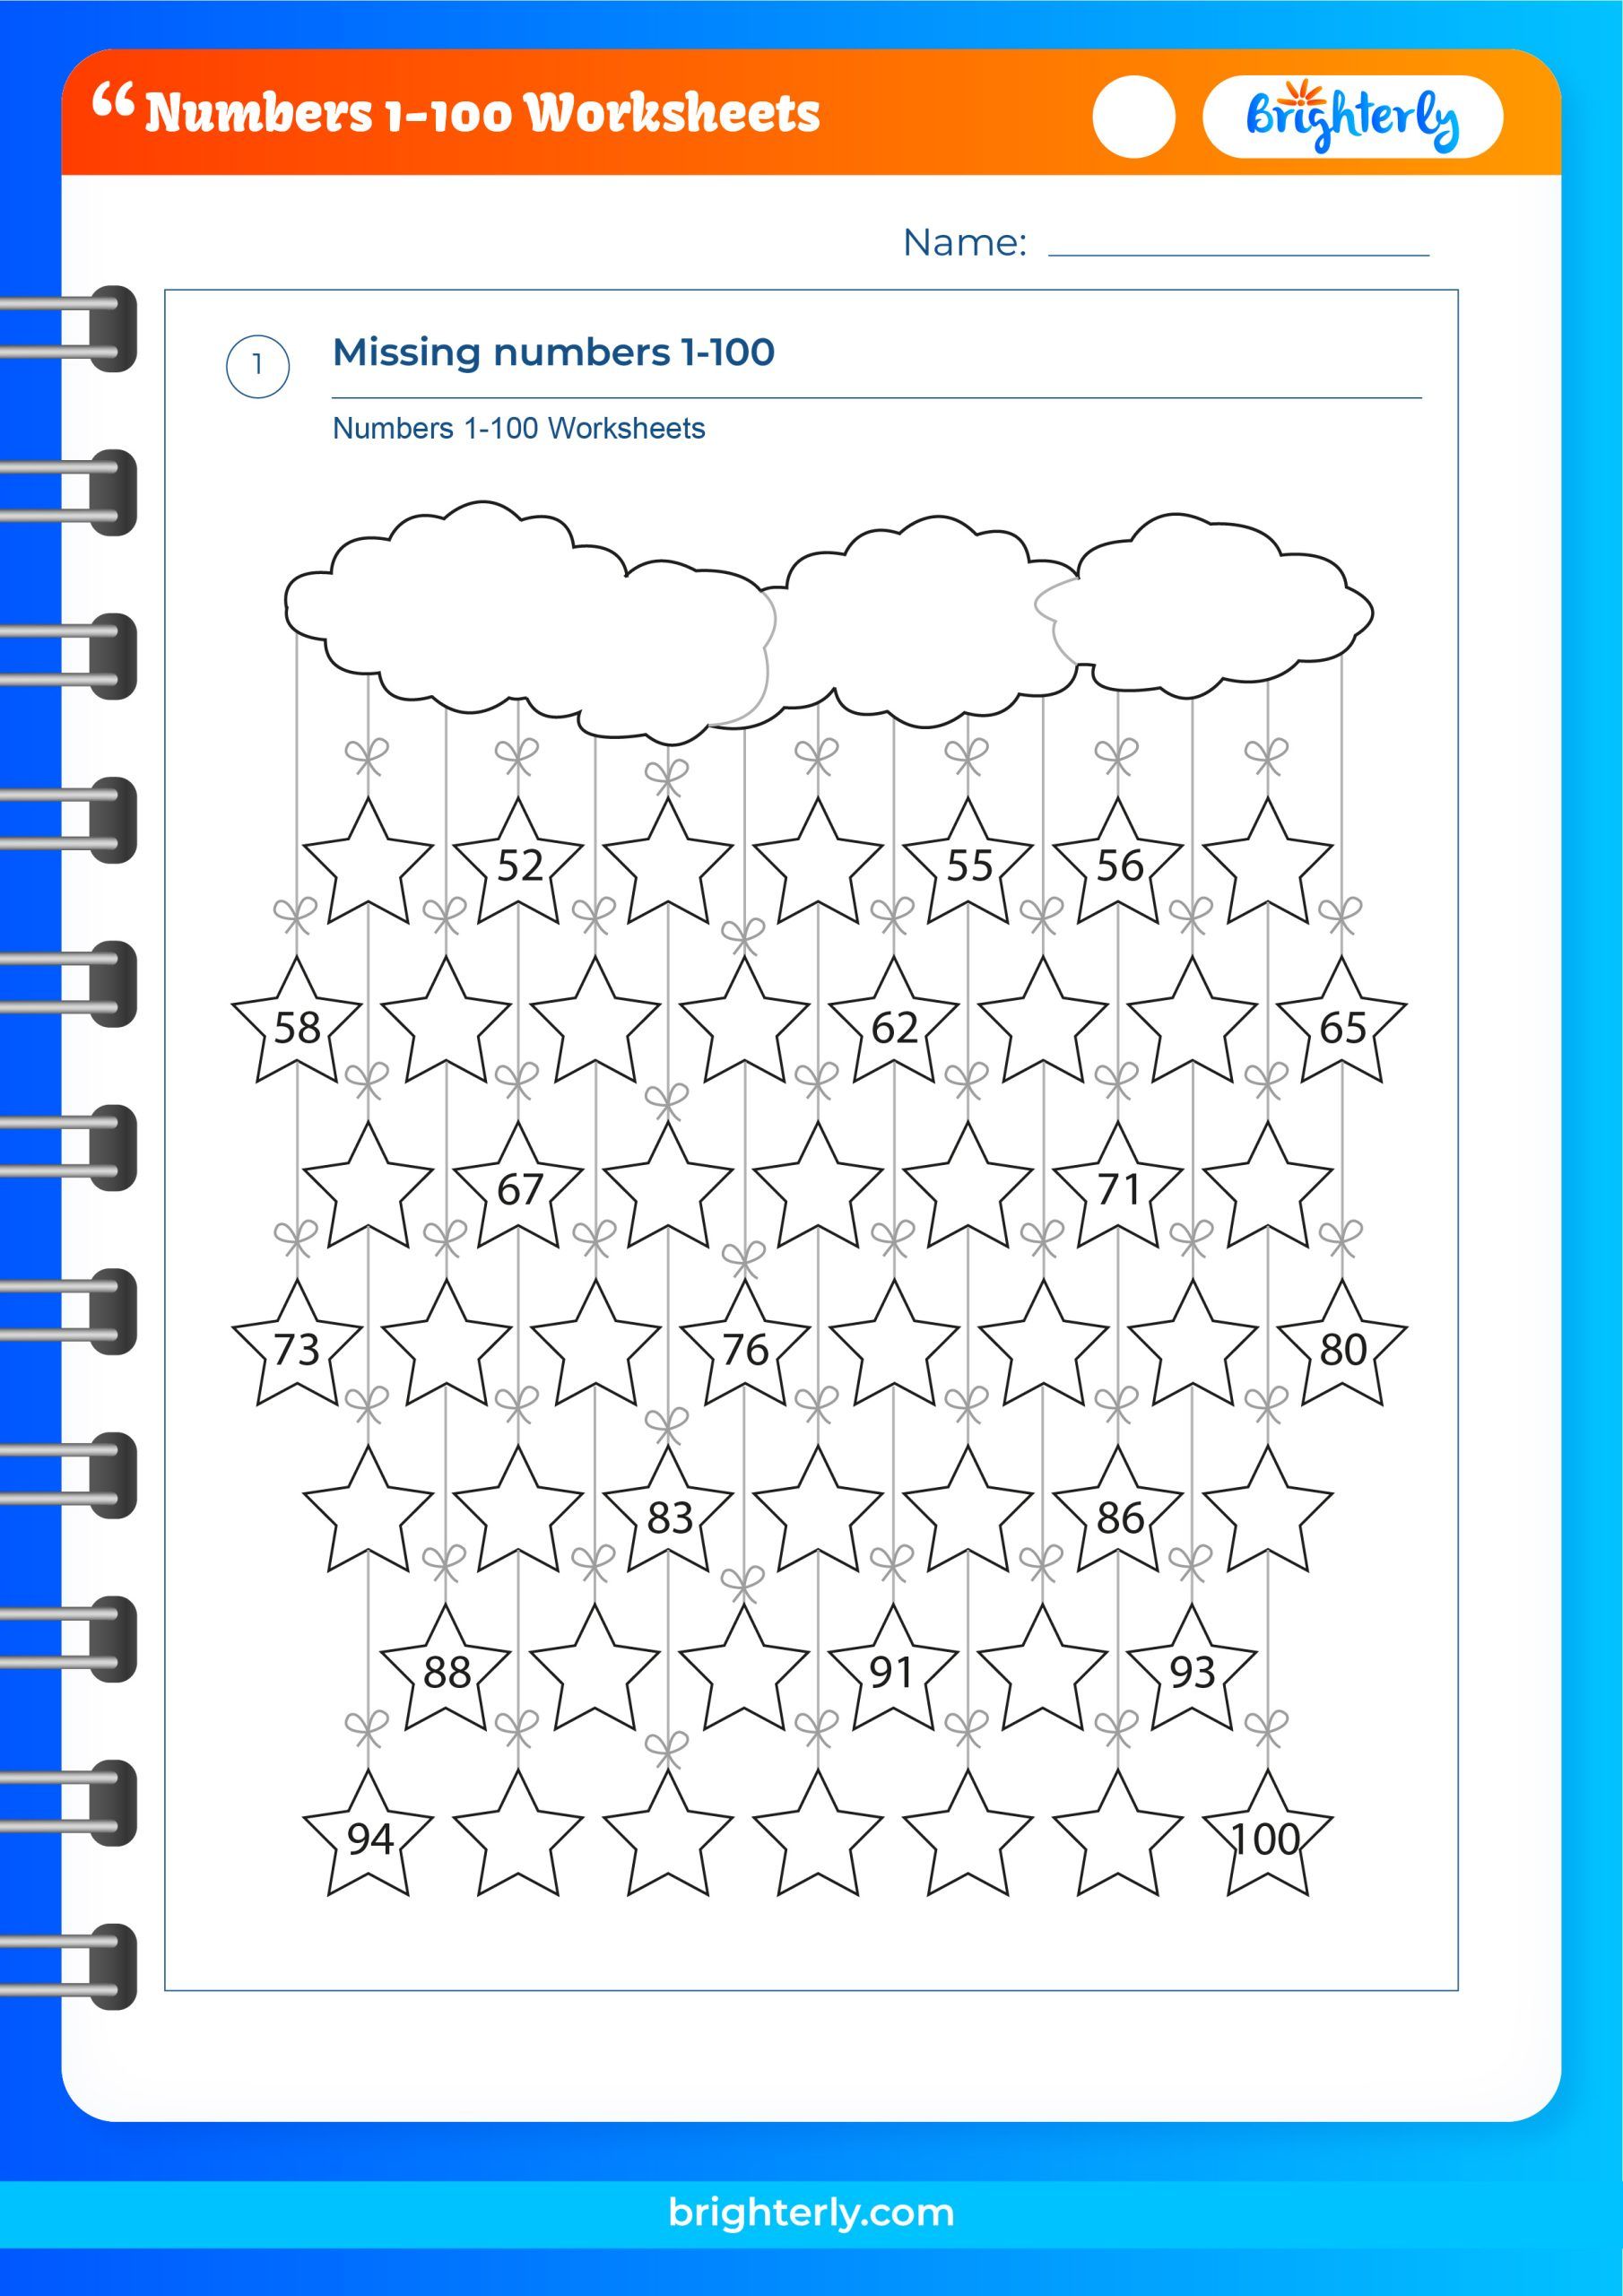 free-printable-numbers-1-100-worksheets-for-kids-pdfs